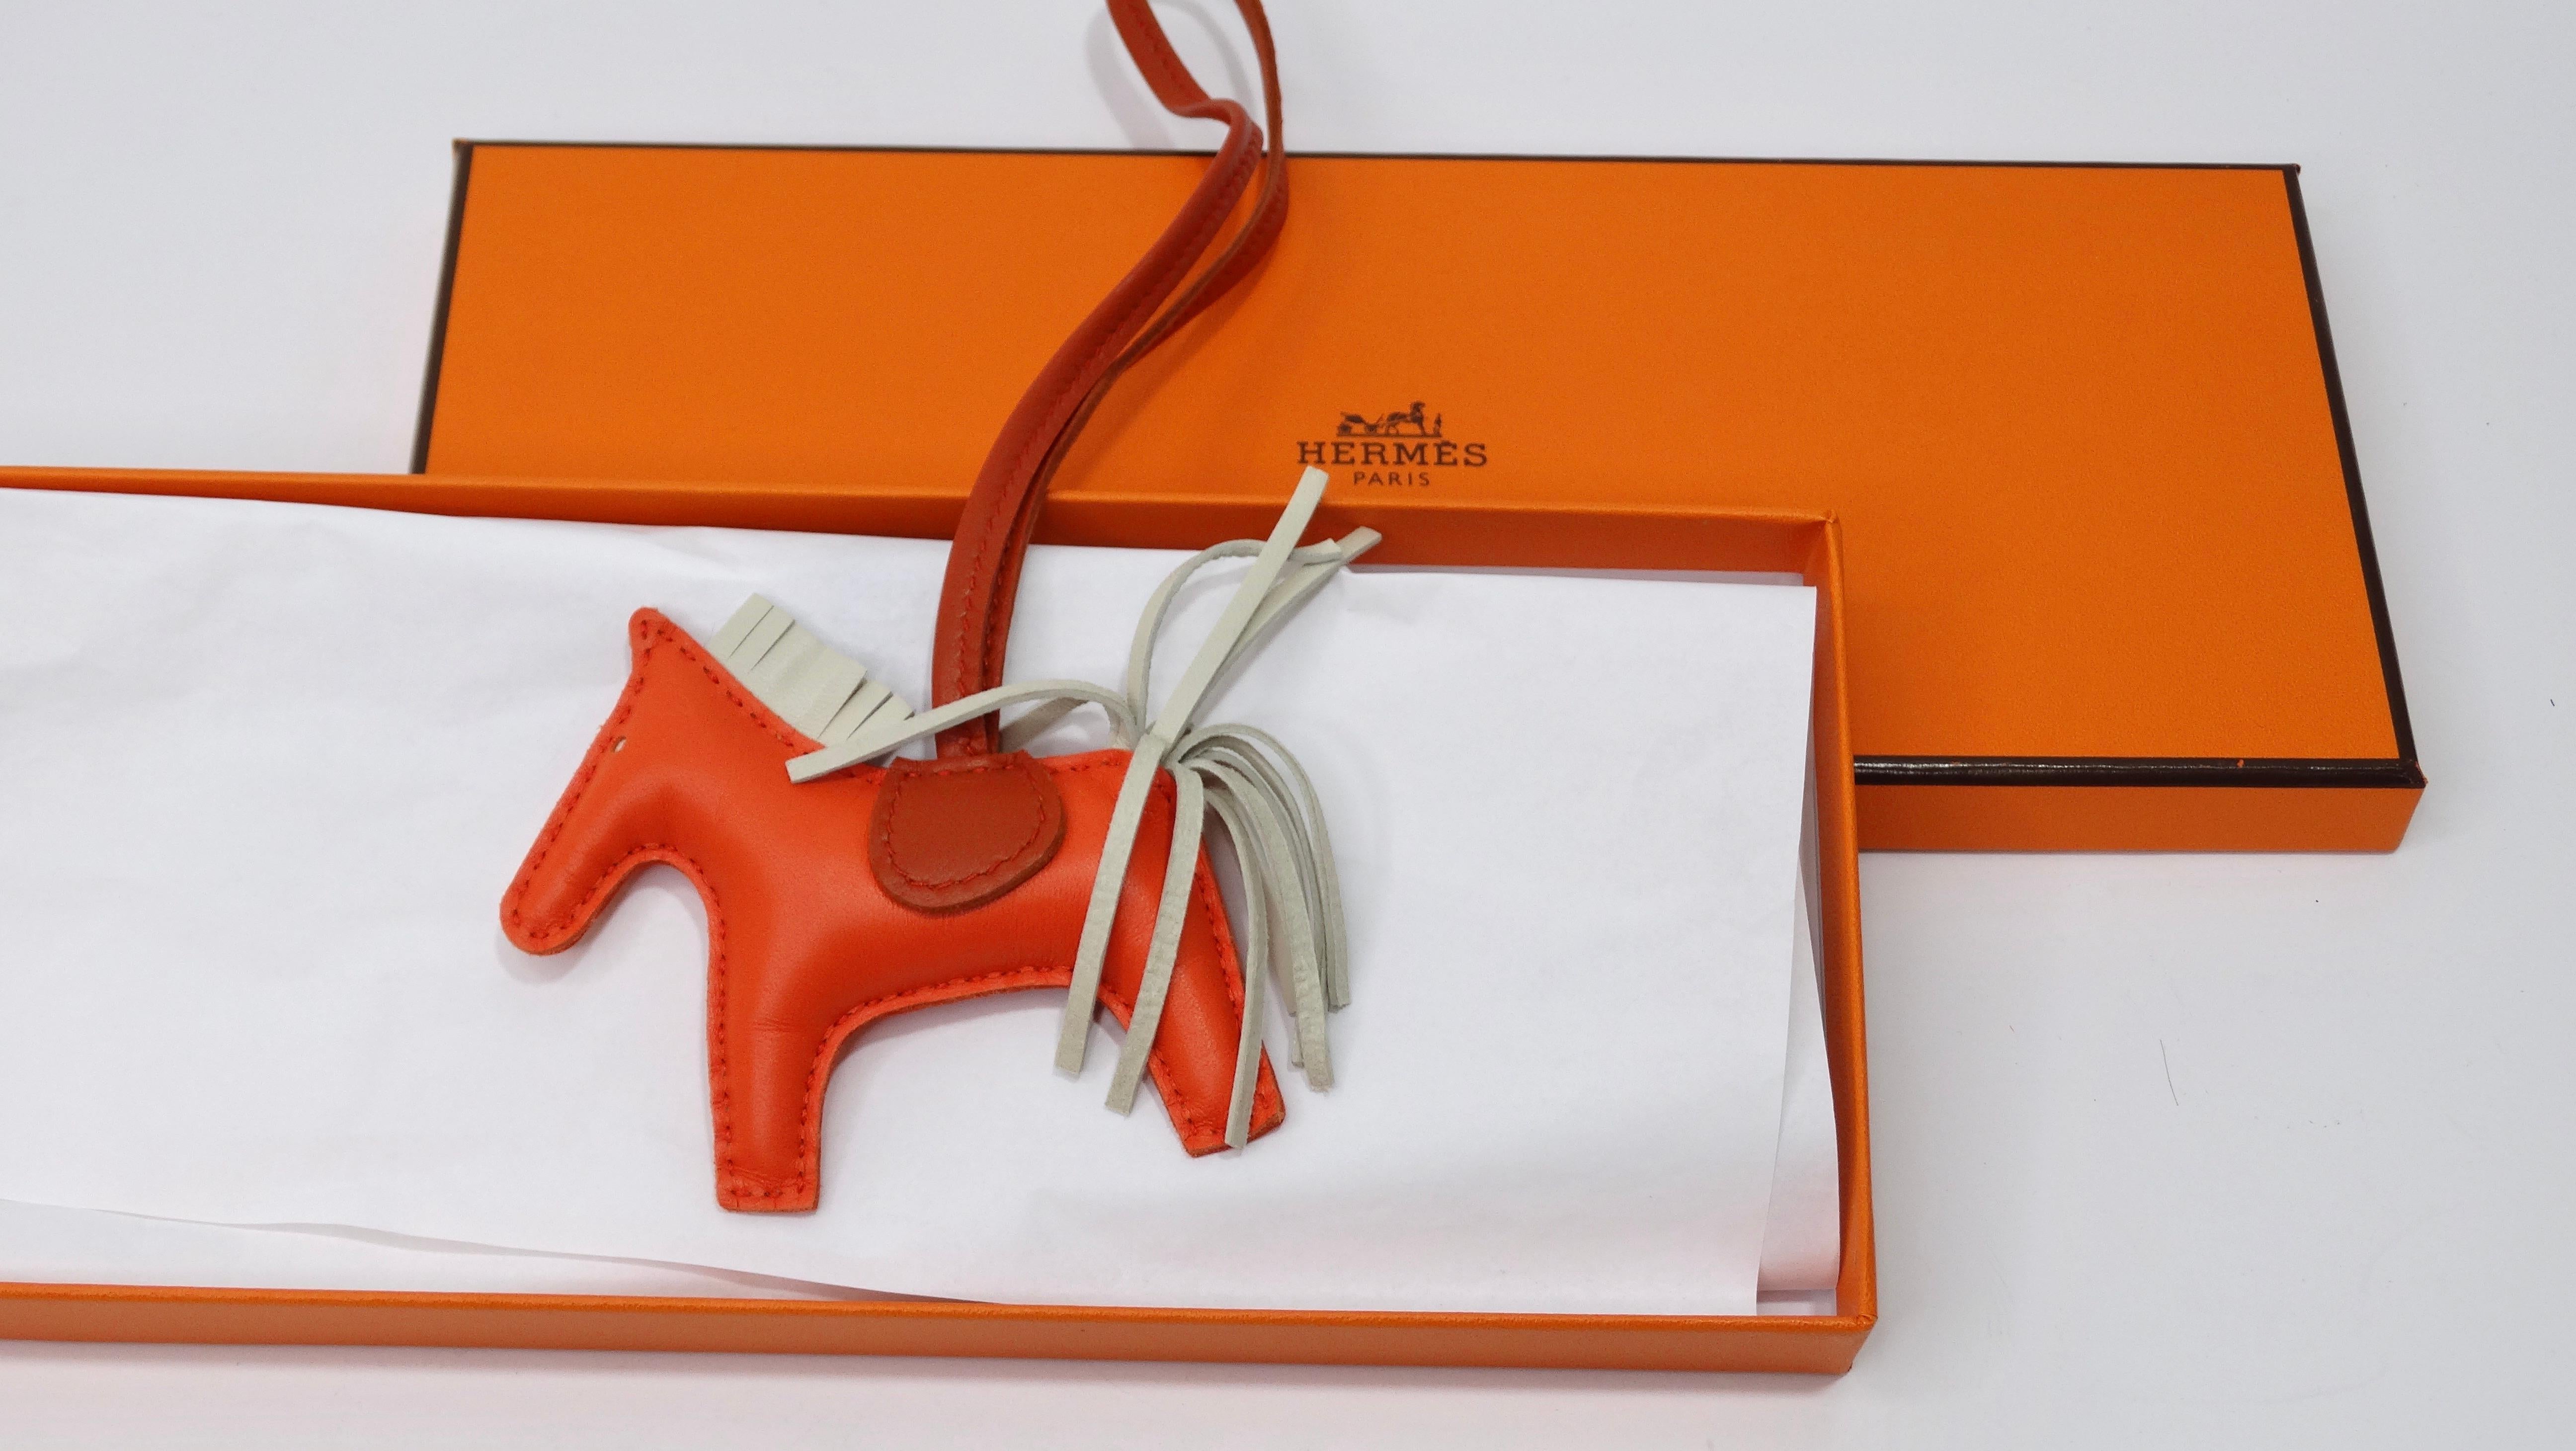 Bring a little flair to your everyday handbag! The key to making fashion effortless is having fun and putting your own unique twist on your ensembles. This is a tiny horse figure will be sure to add a bright touch to your favorite accessory. This